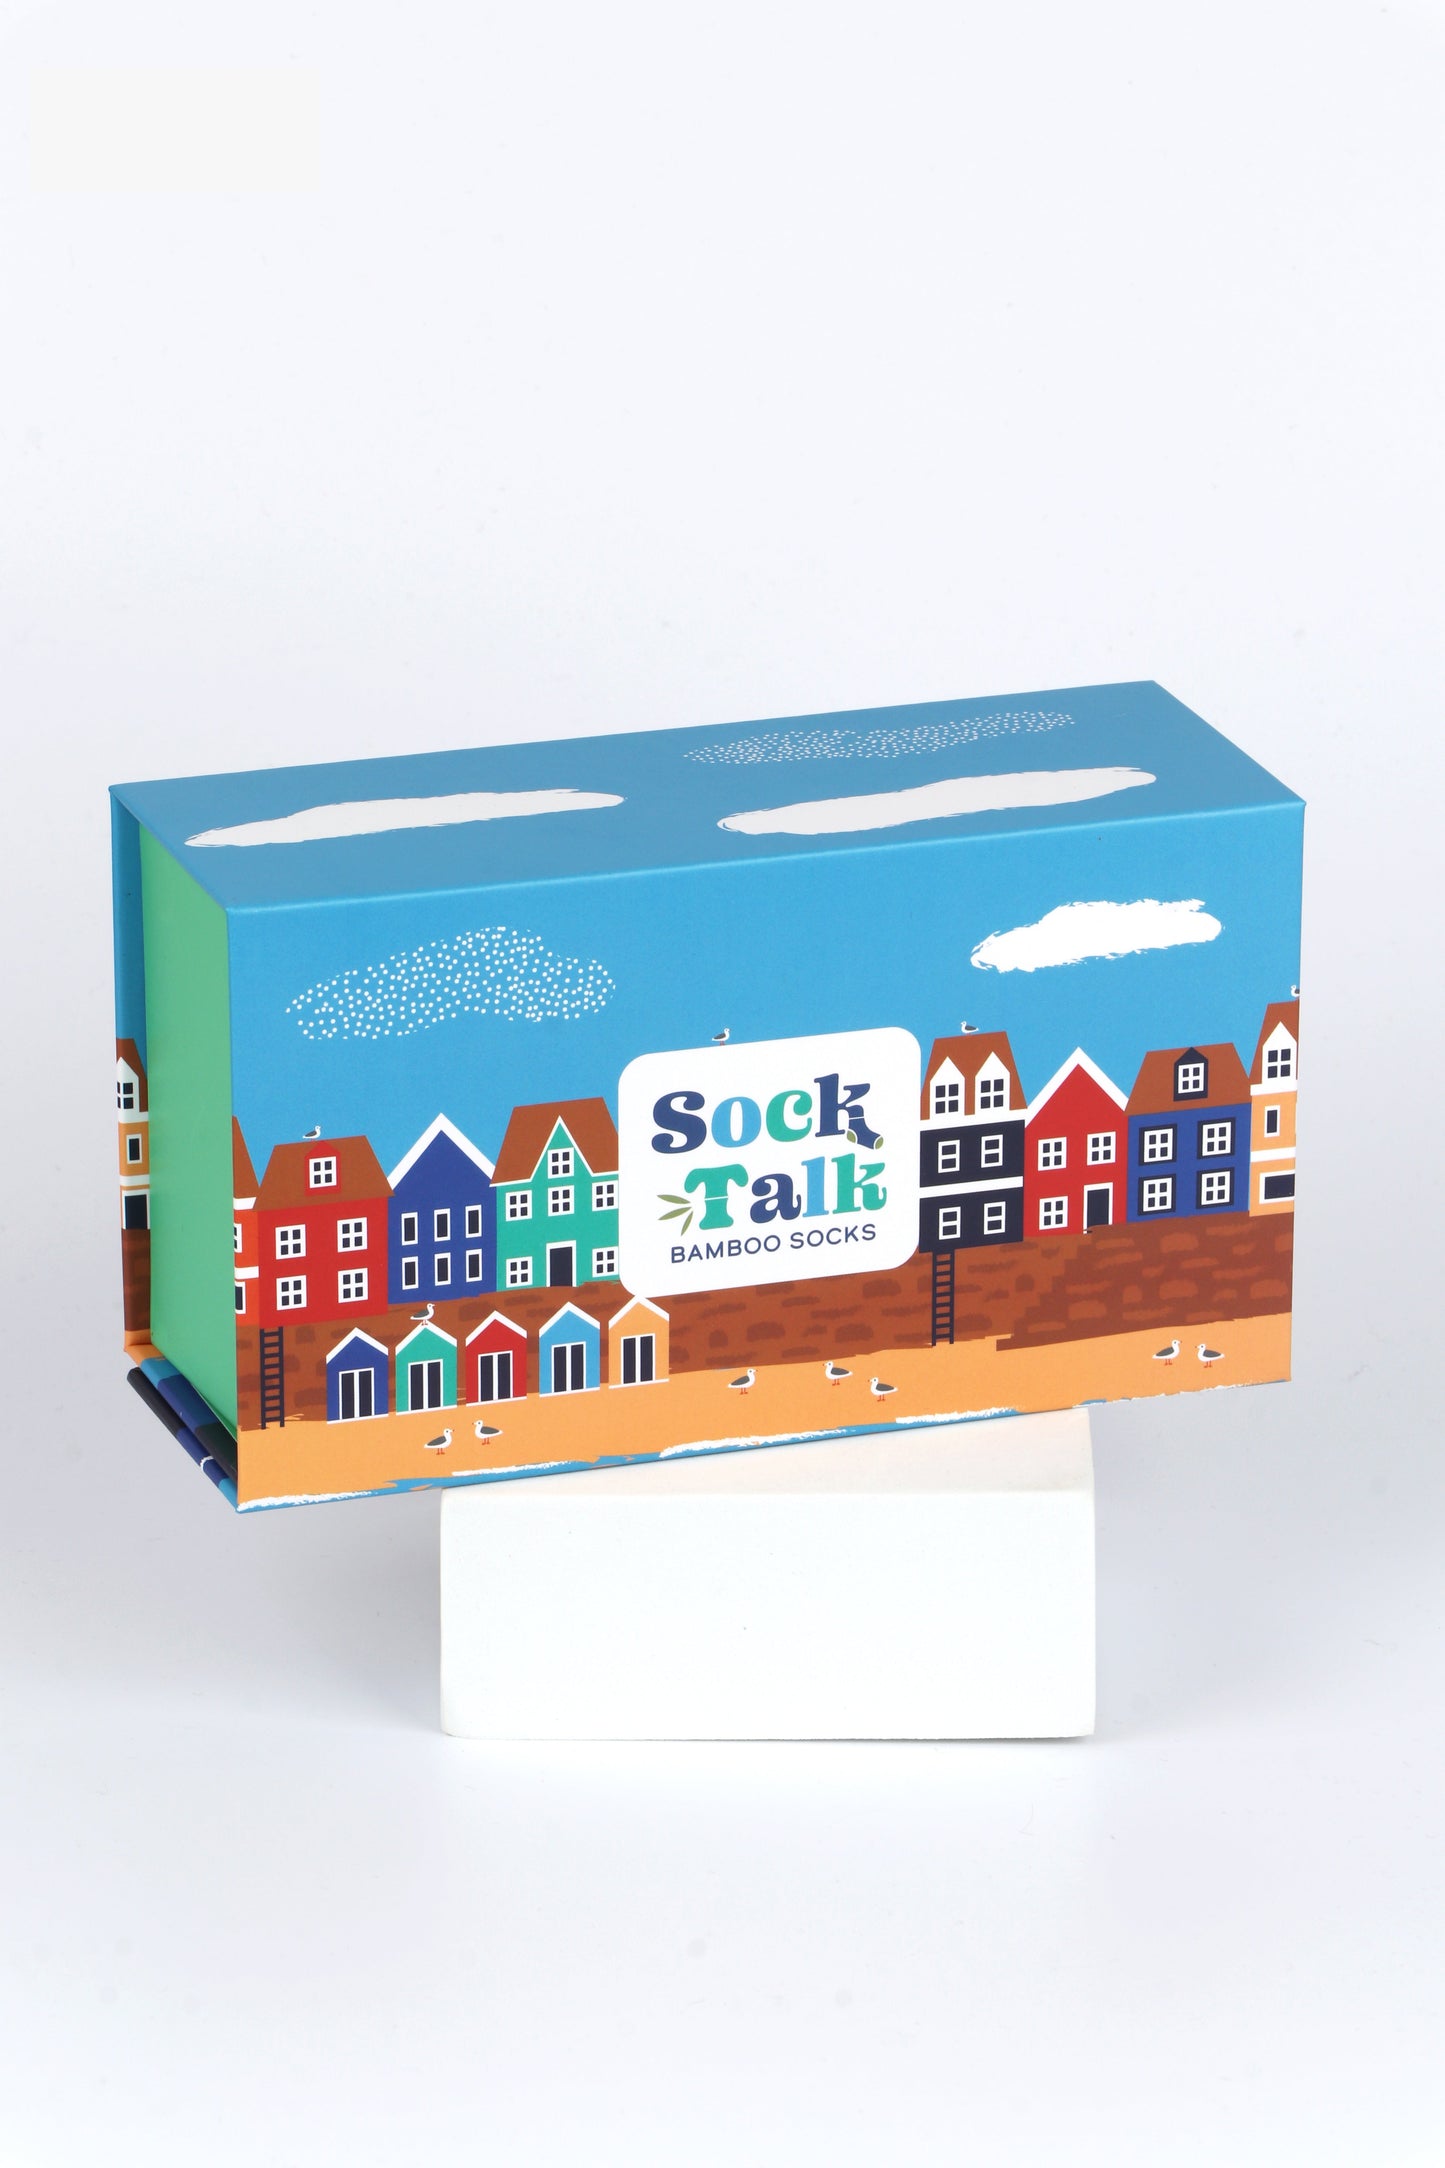 sock talk gift box designed to look like a seaside town with a beach, beach huts and colourful houses along the boardwalk